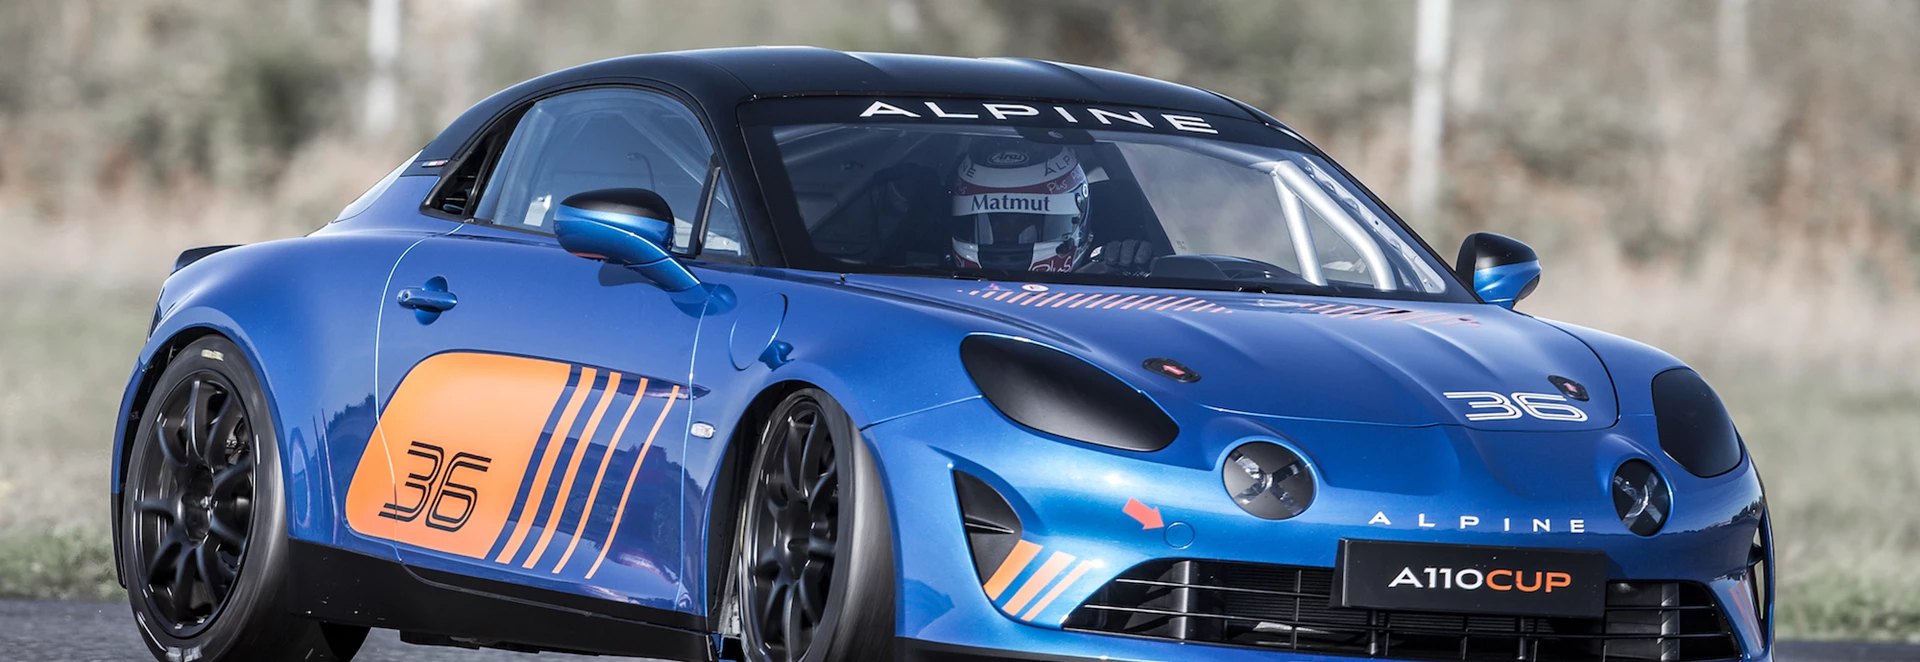 Alpine reveals racing edition of new A110 